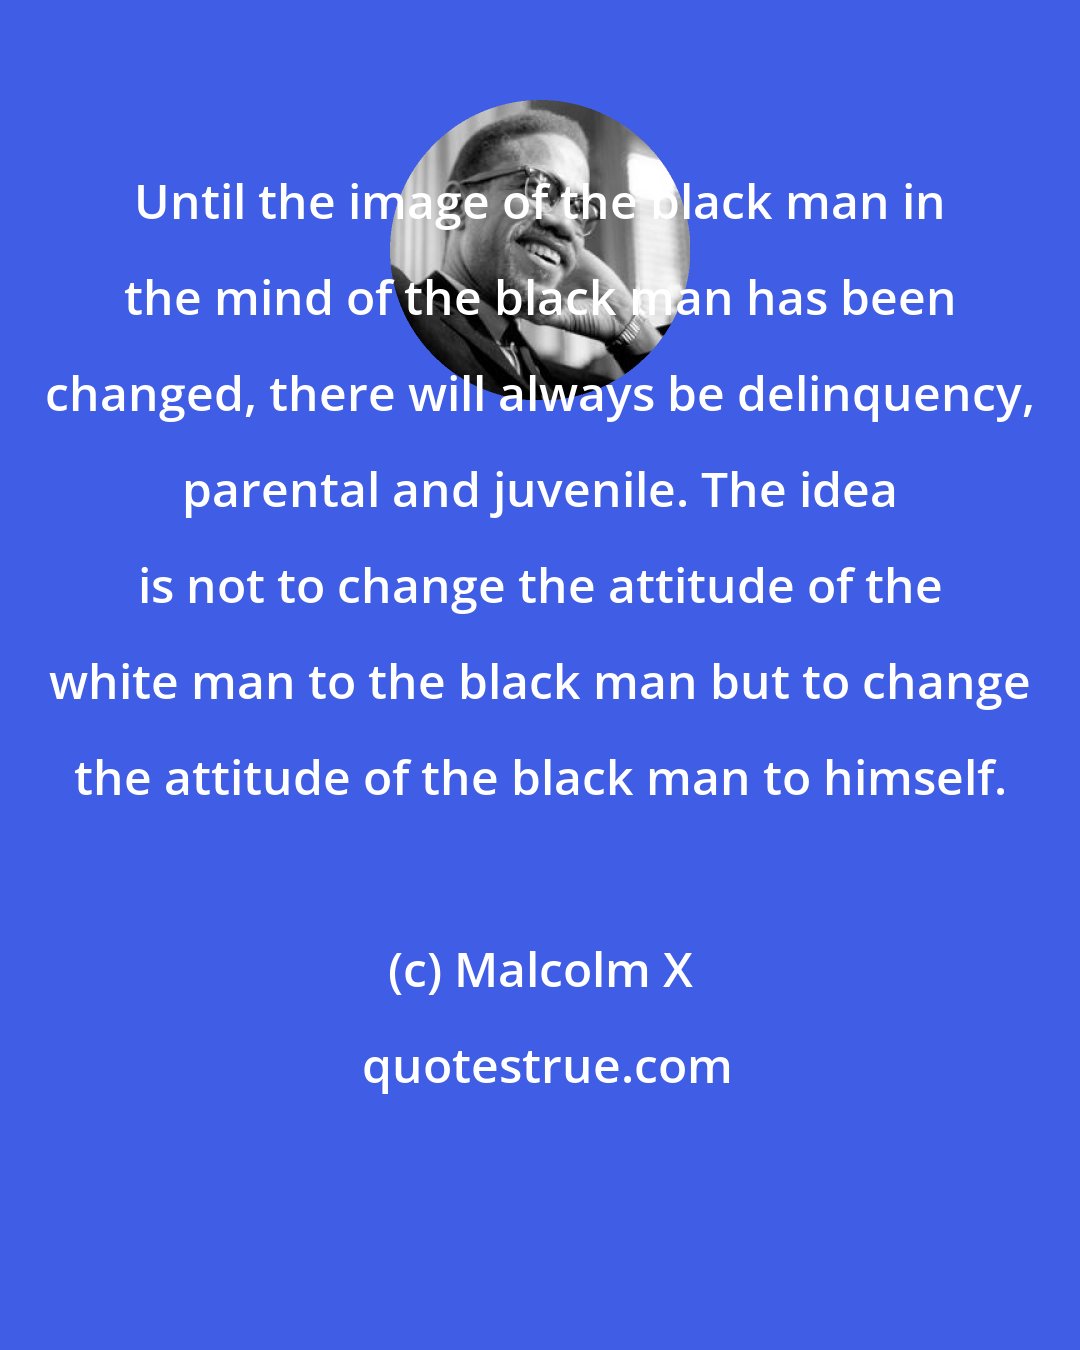 Malcolm X: Until the image of the black man in the mind of the black man has been changed, there will always be delinquency, parental and juvenile. The idea is not to change the attitude of the white man to the black man but to change the attitude of the black man to himself.